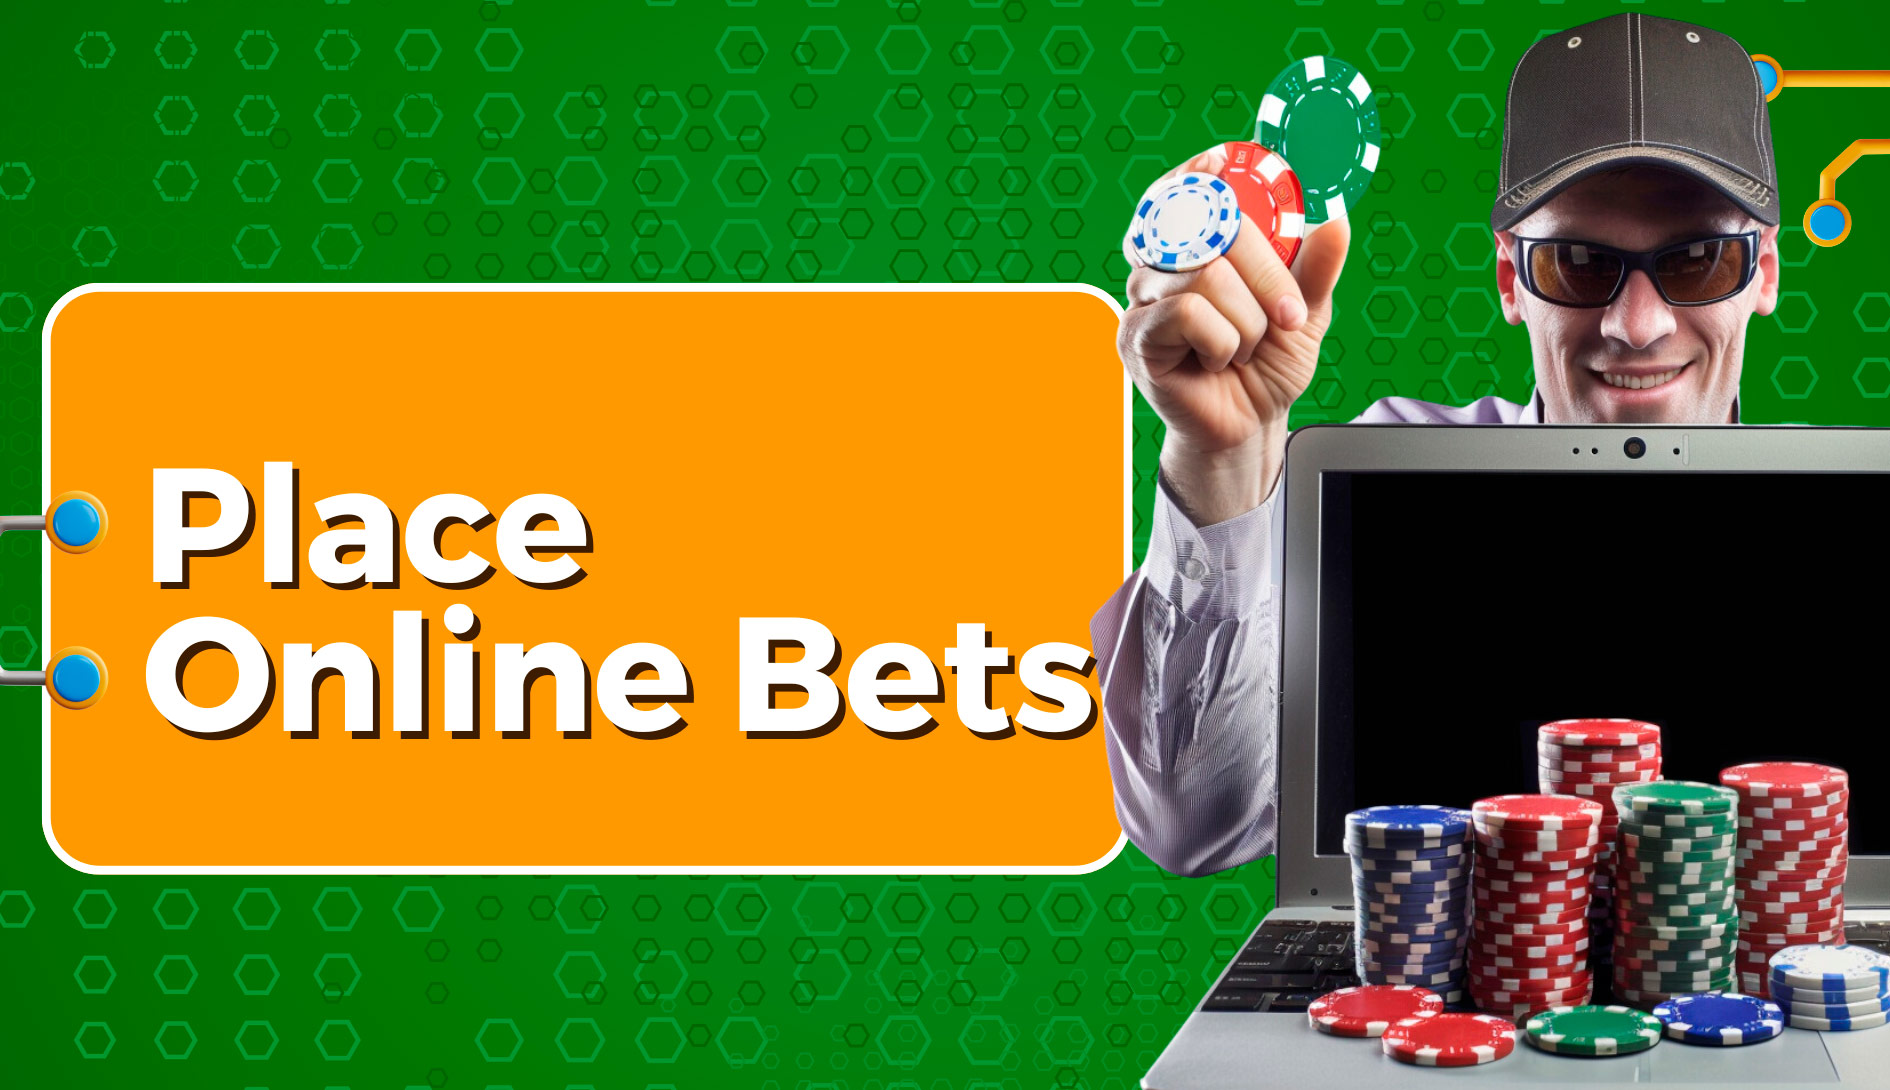 Where To Place Online Bets